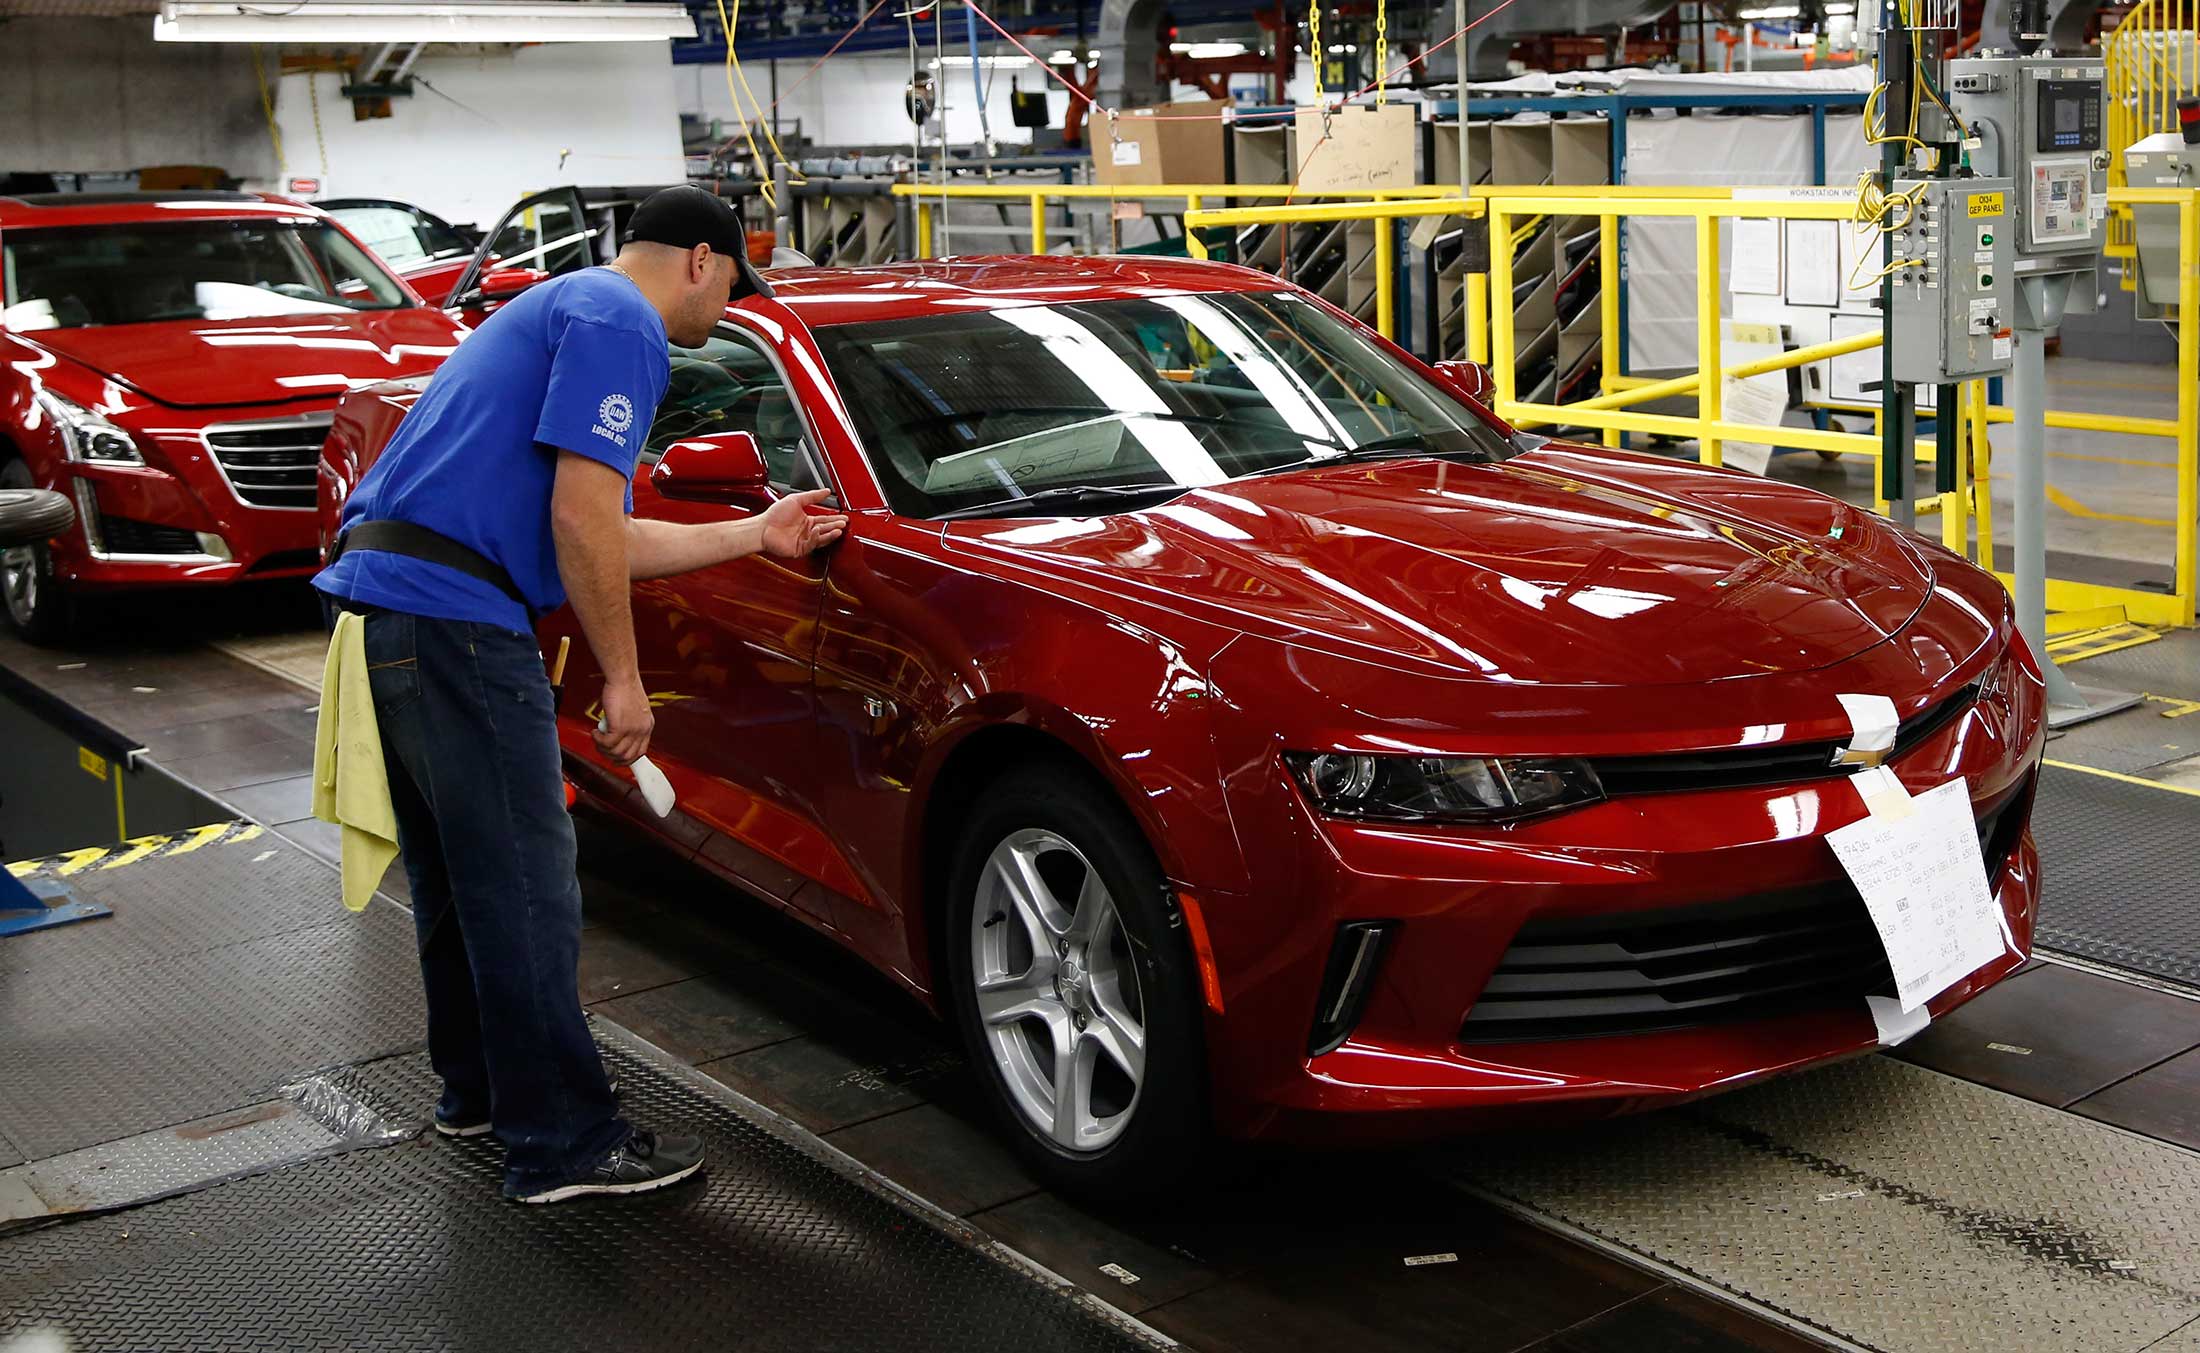 An employee works on a 2016 Chevrolet Camaro on the production line at the General Motors Co. (GM) Lansing Grand River Assembly plant in Lansing, Michigan, on Oct. 26.
